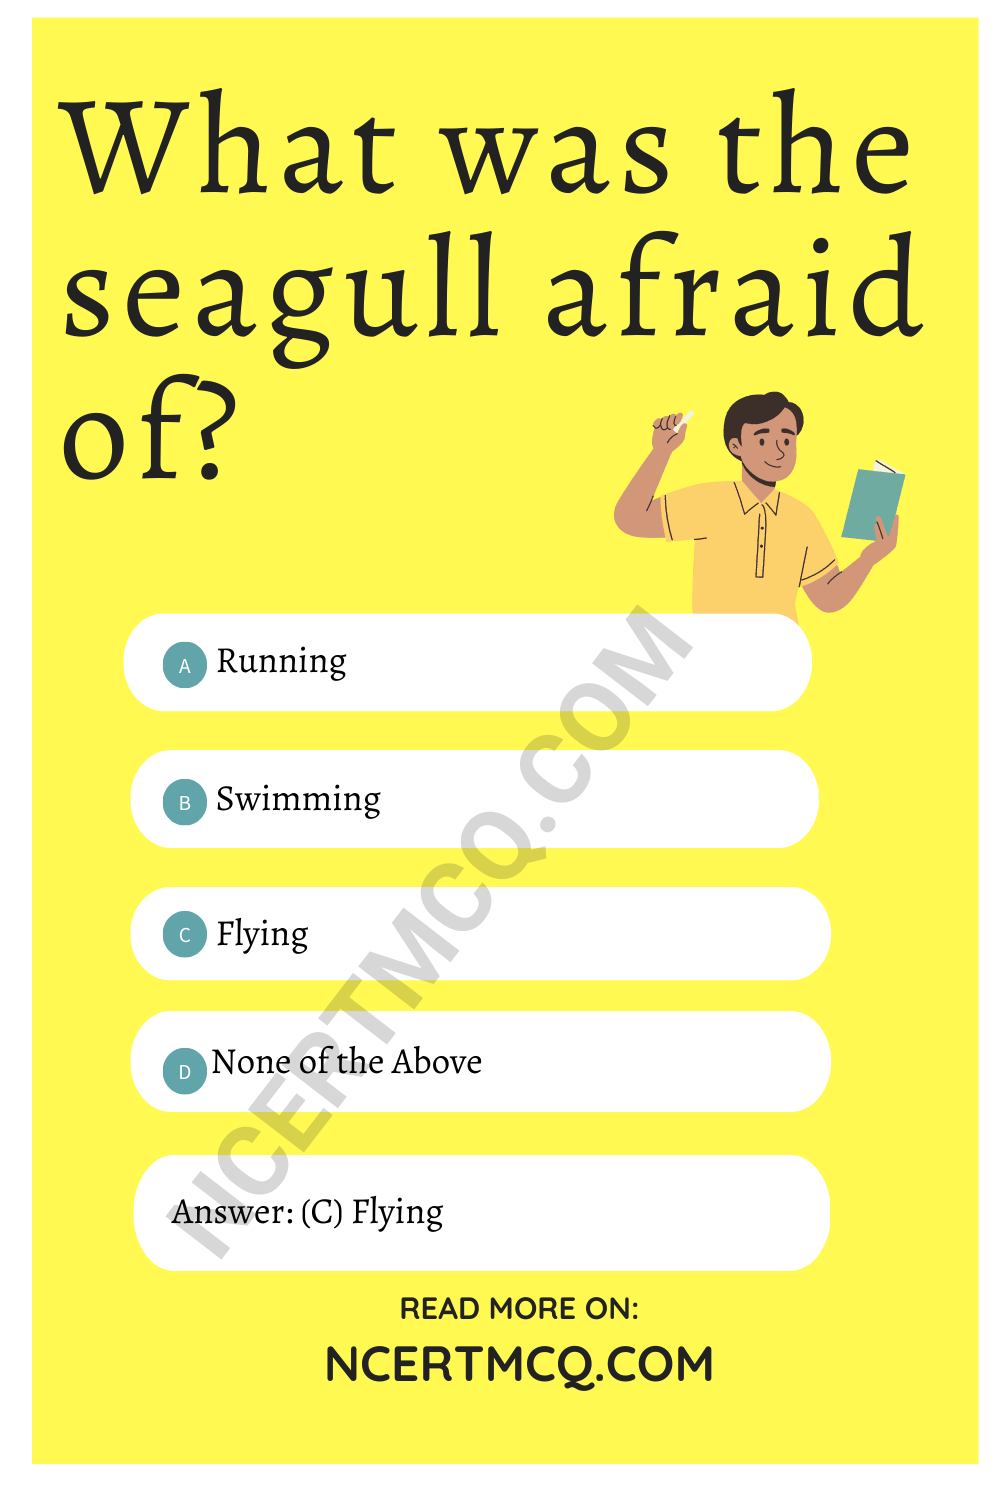 What was the seagull afraid of?